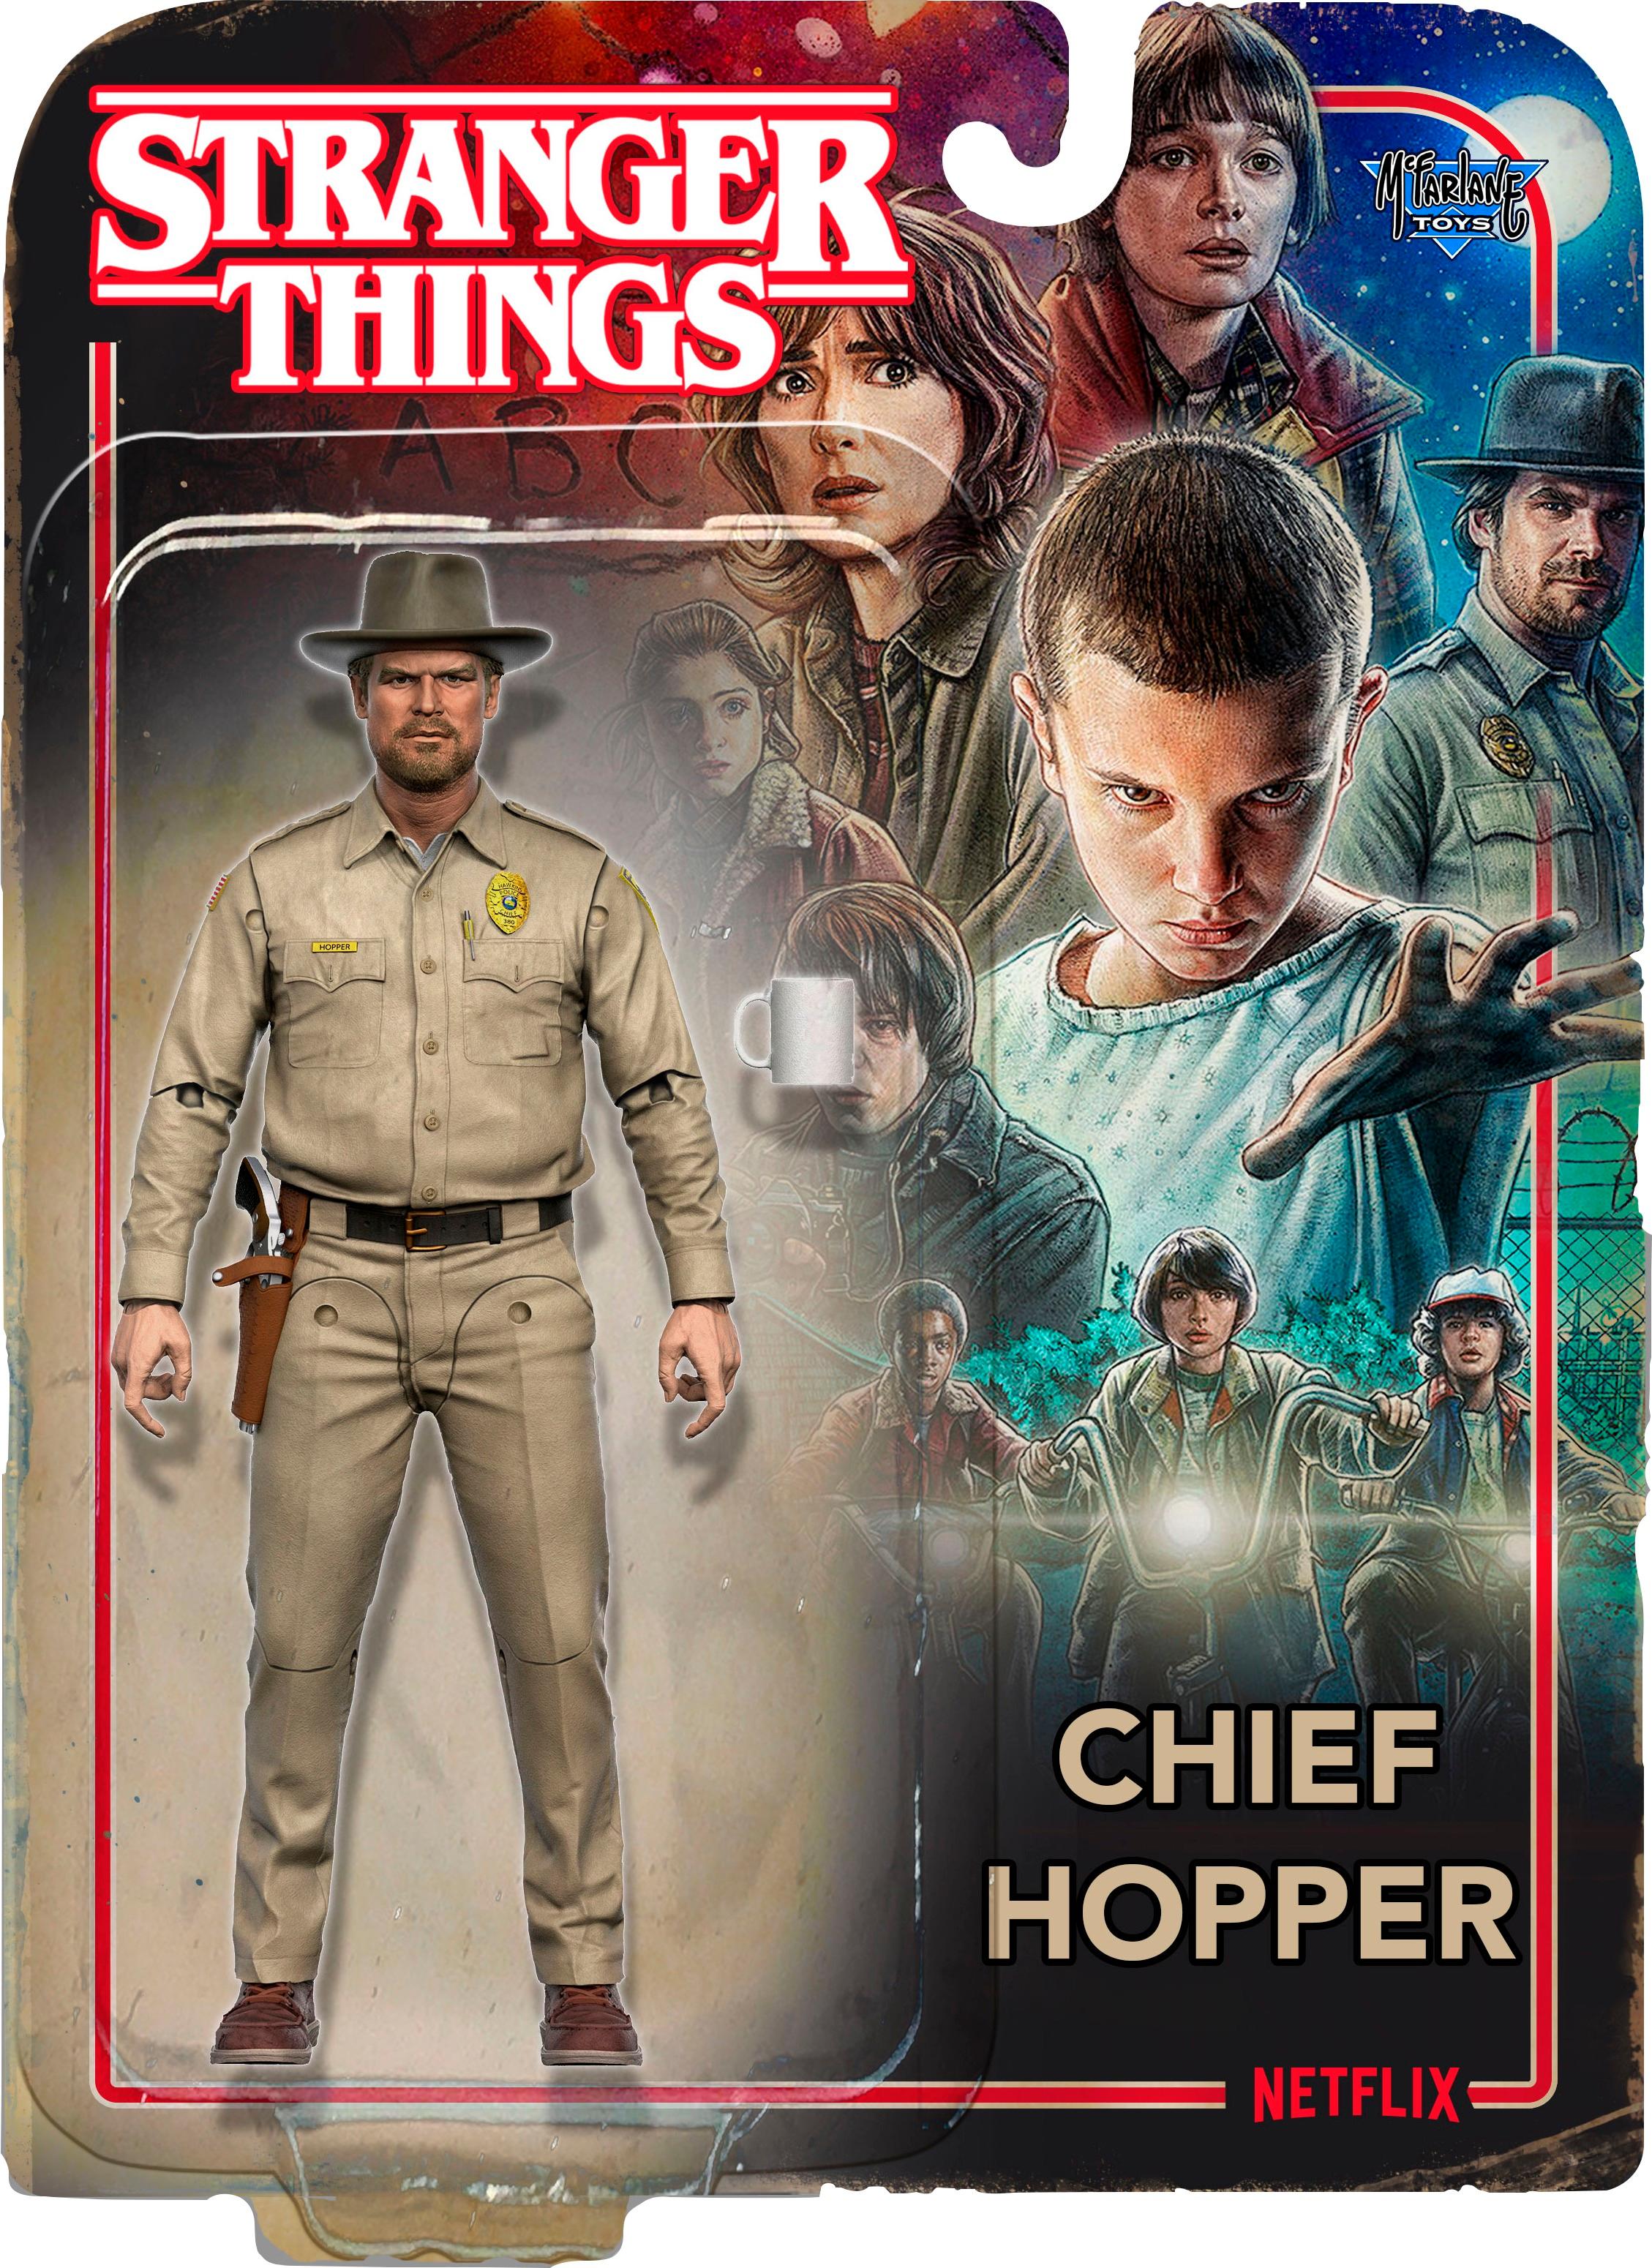 McFarlane Toys Stranger Things Chief Hopper 2 Action Figure for sale online 